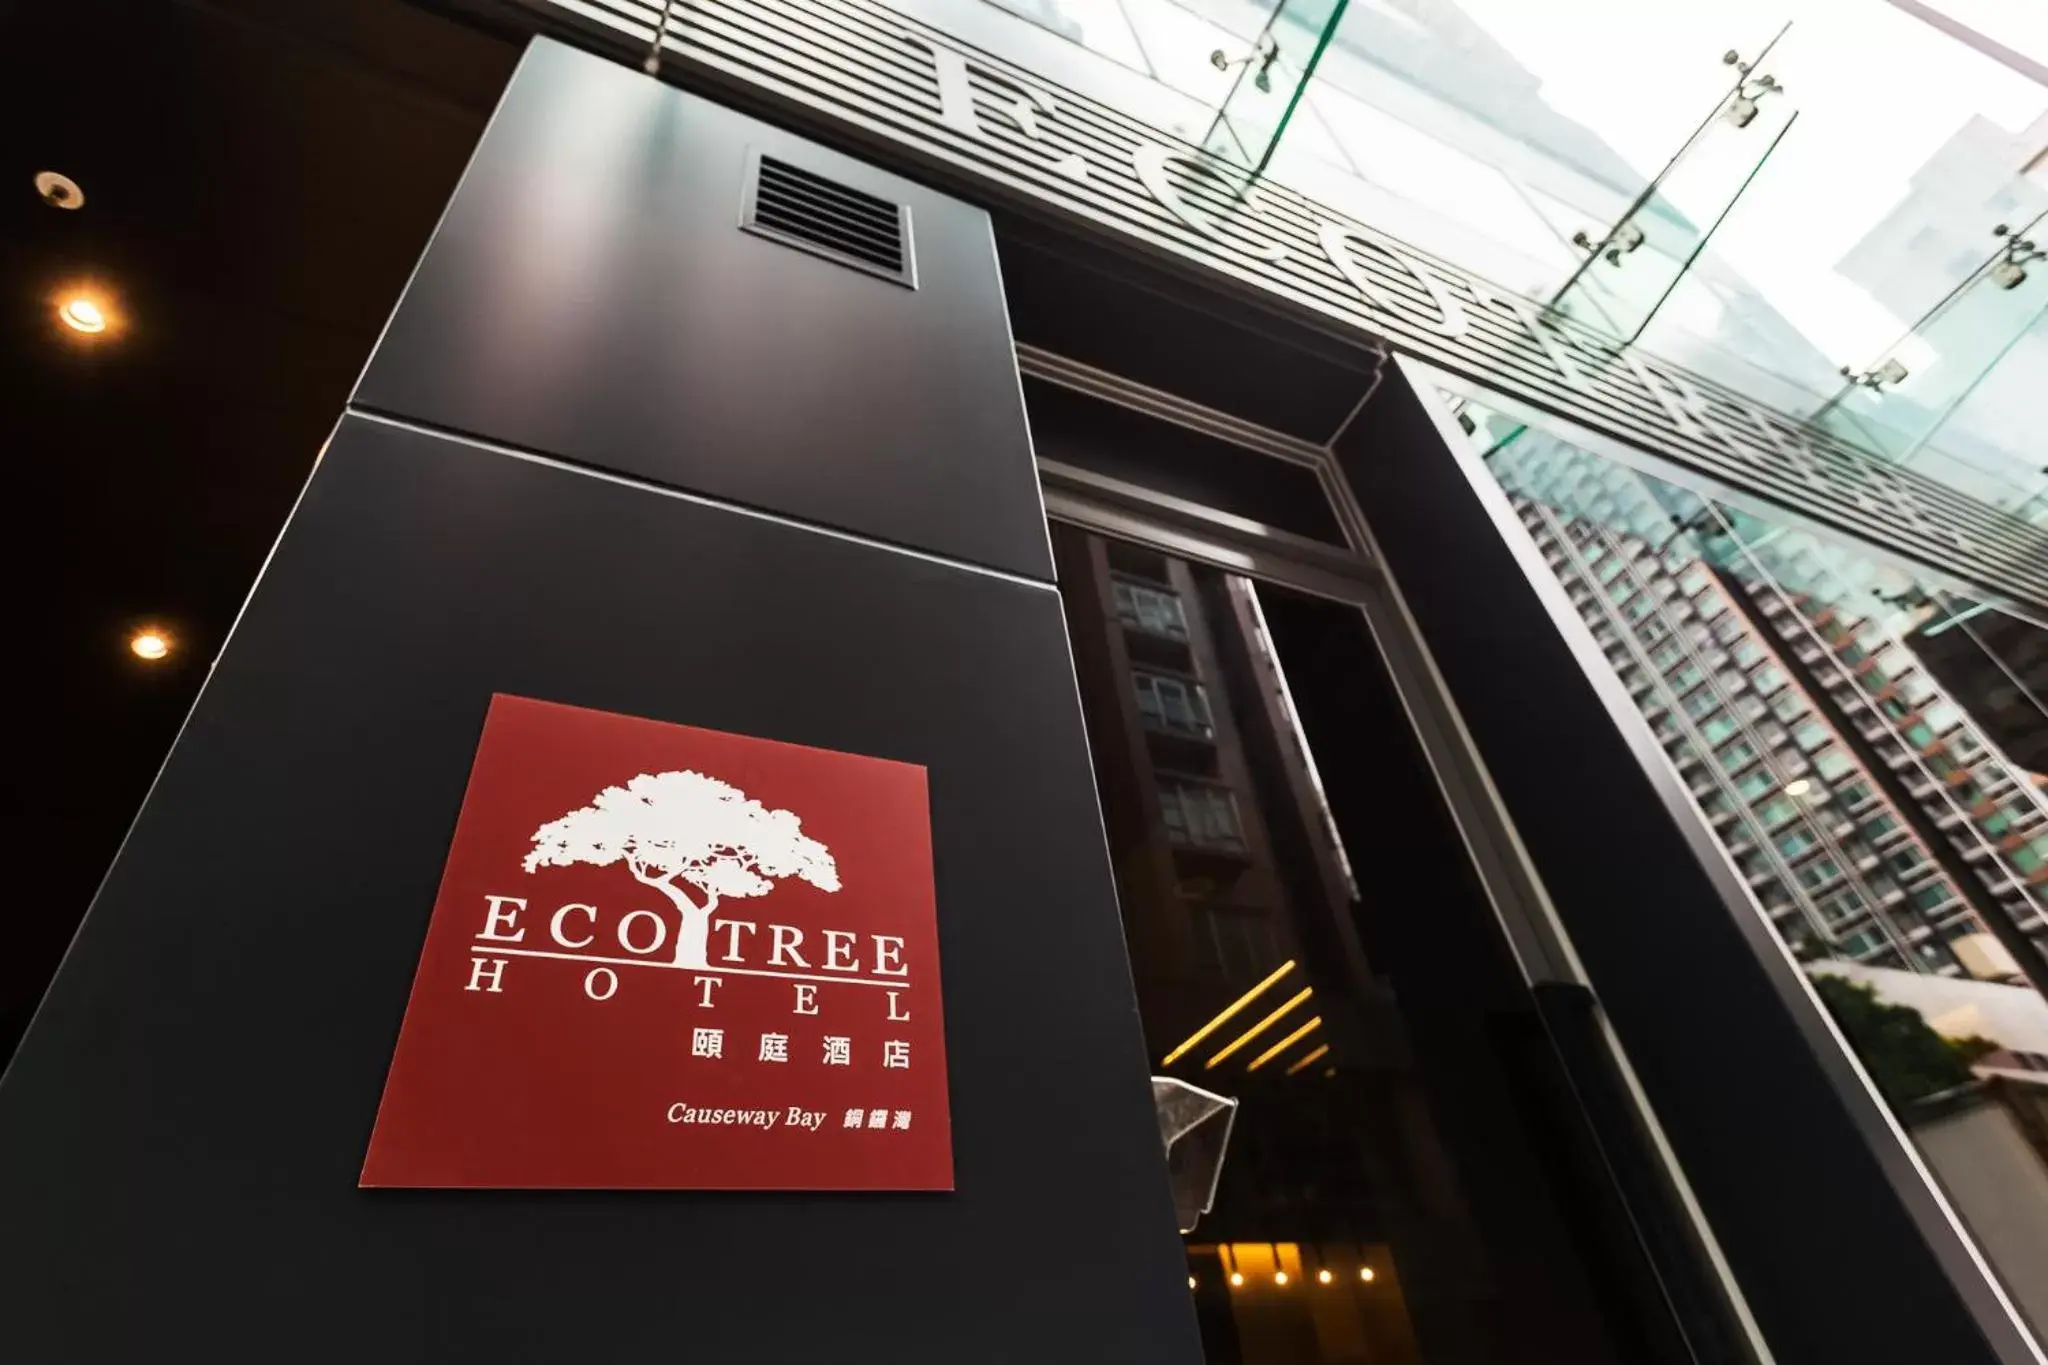 Property Building in Eco Tree Hotel Causeway Bay